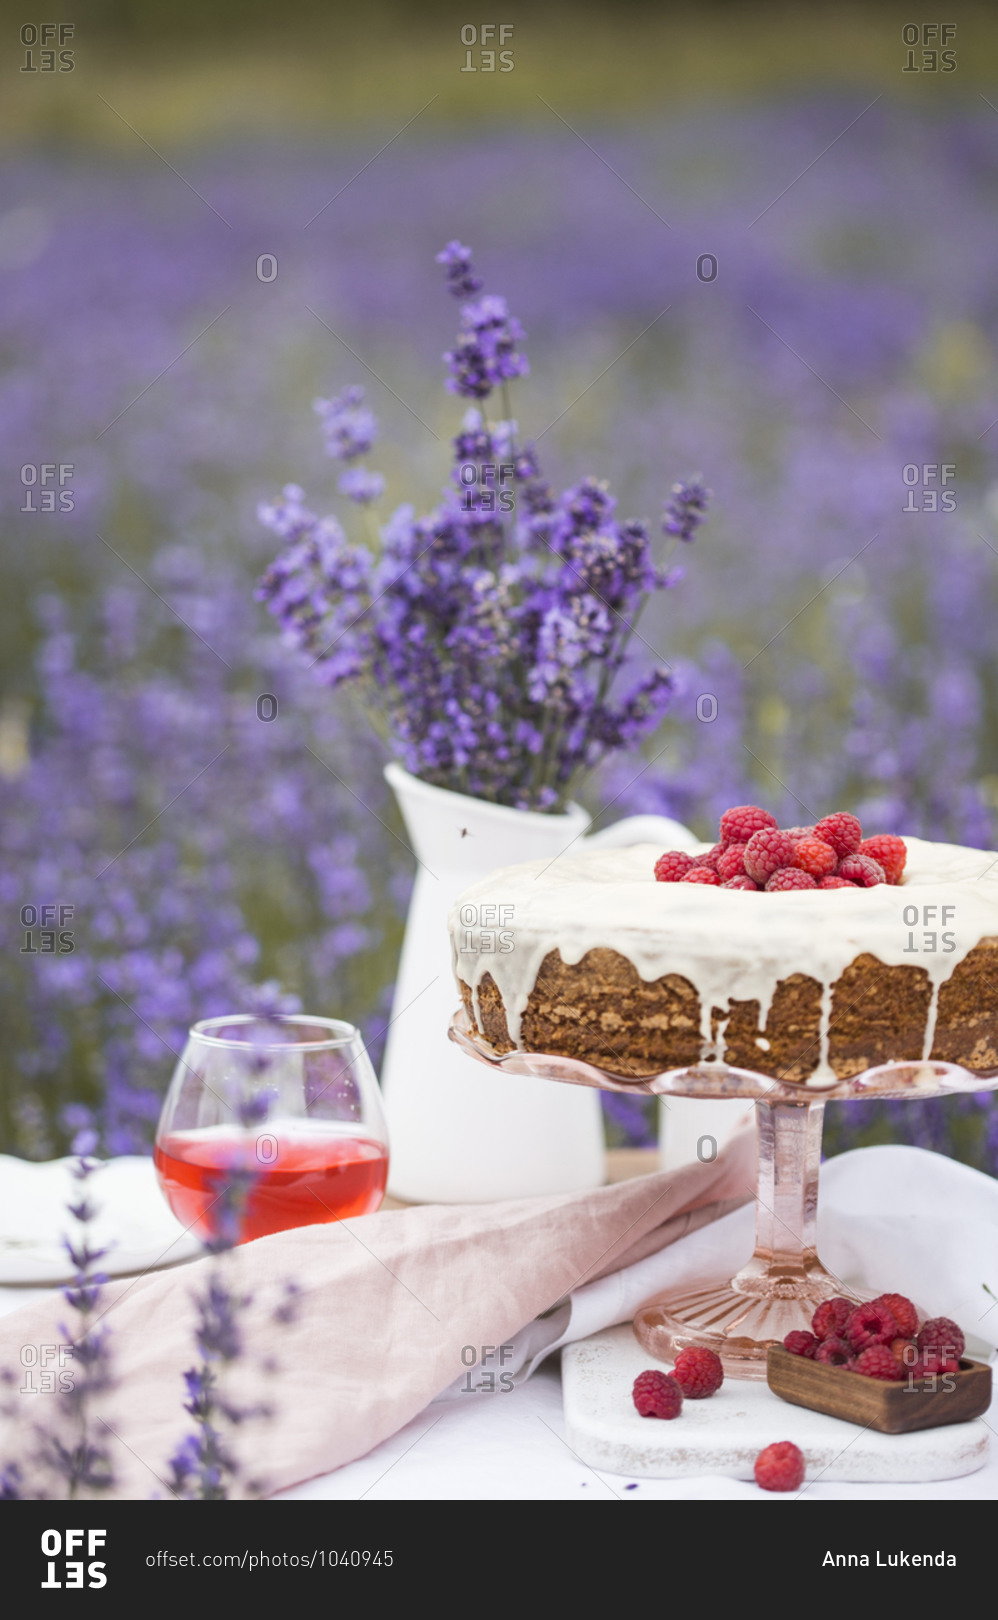 Carrot cake with raspberries on the table in a lavender field